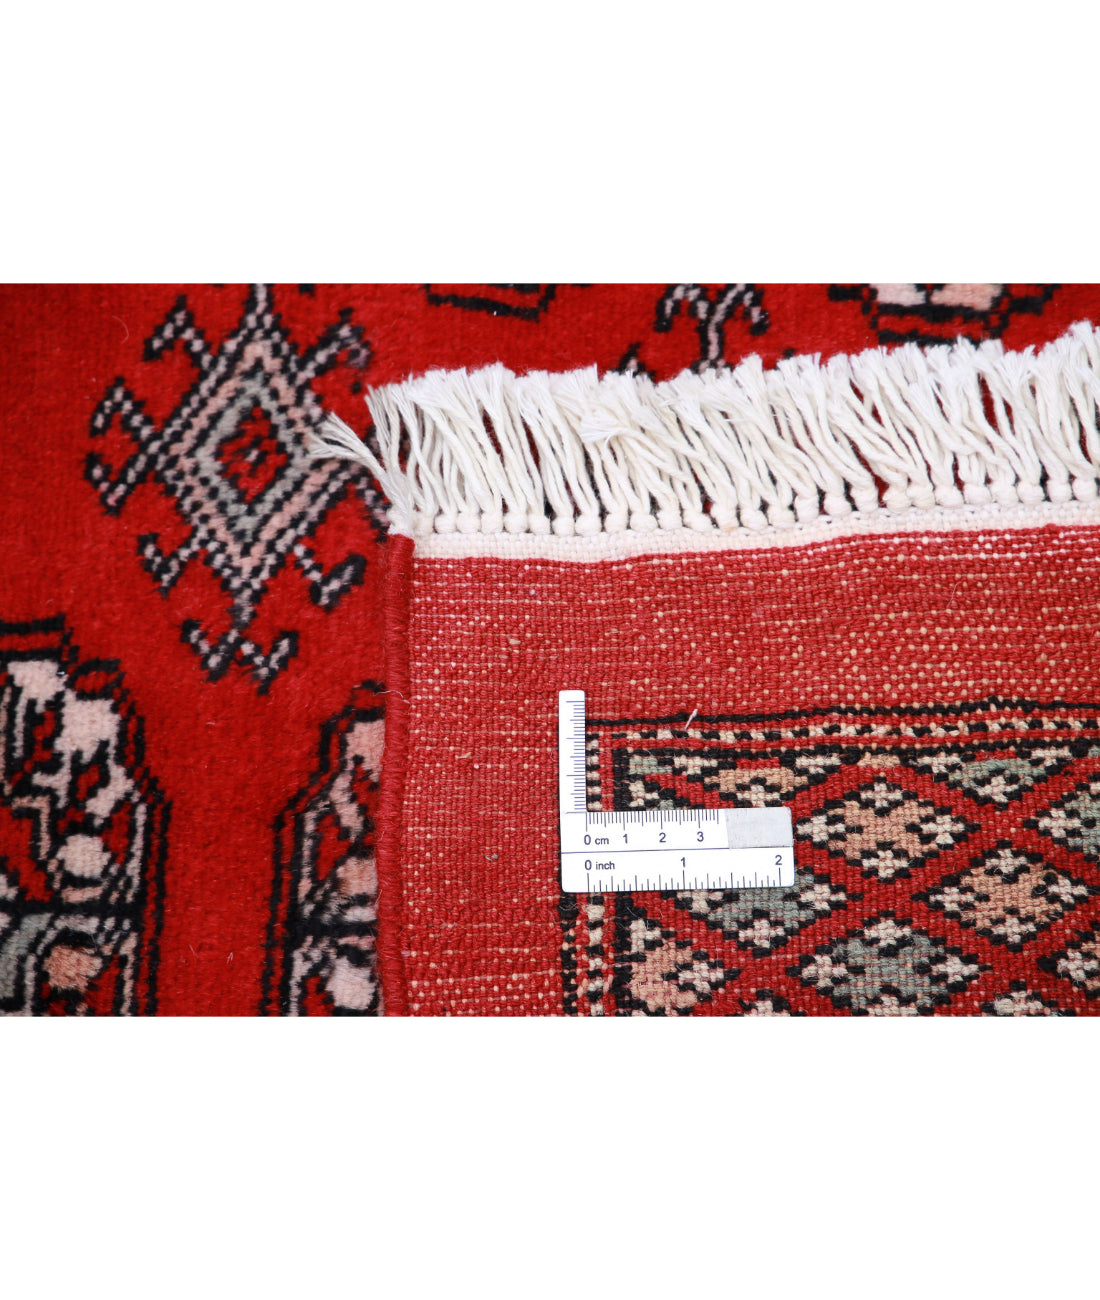 Hand Knotted Tribal Bokhara Wool Rug - 10'2'' x 14'5'' 10'2'' x 14'5'' (305 X 433) / Red / Taupe